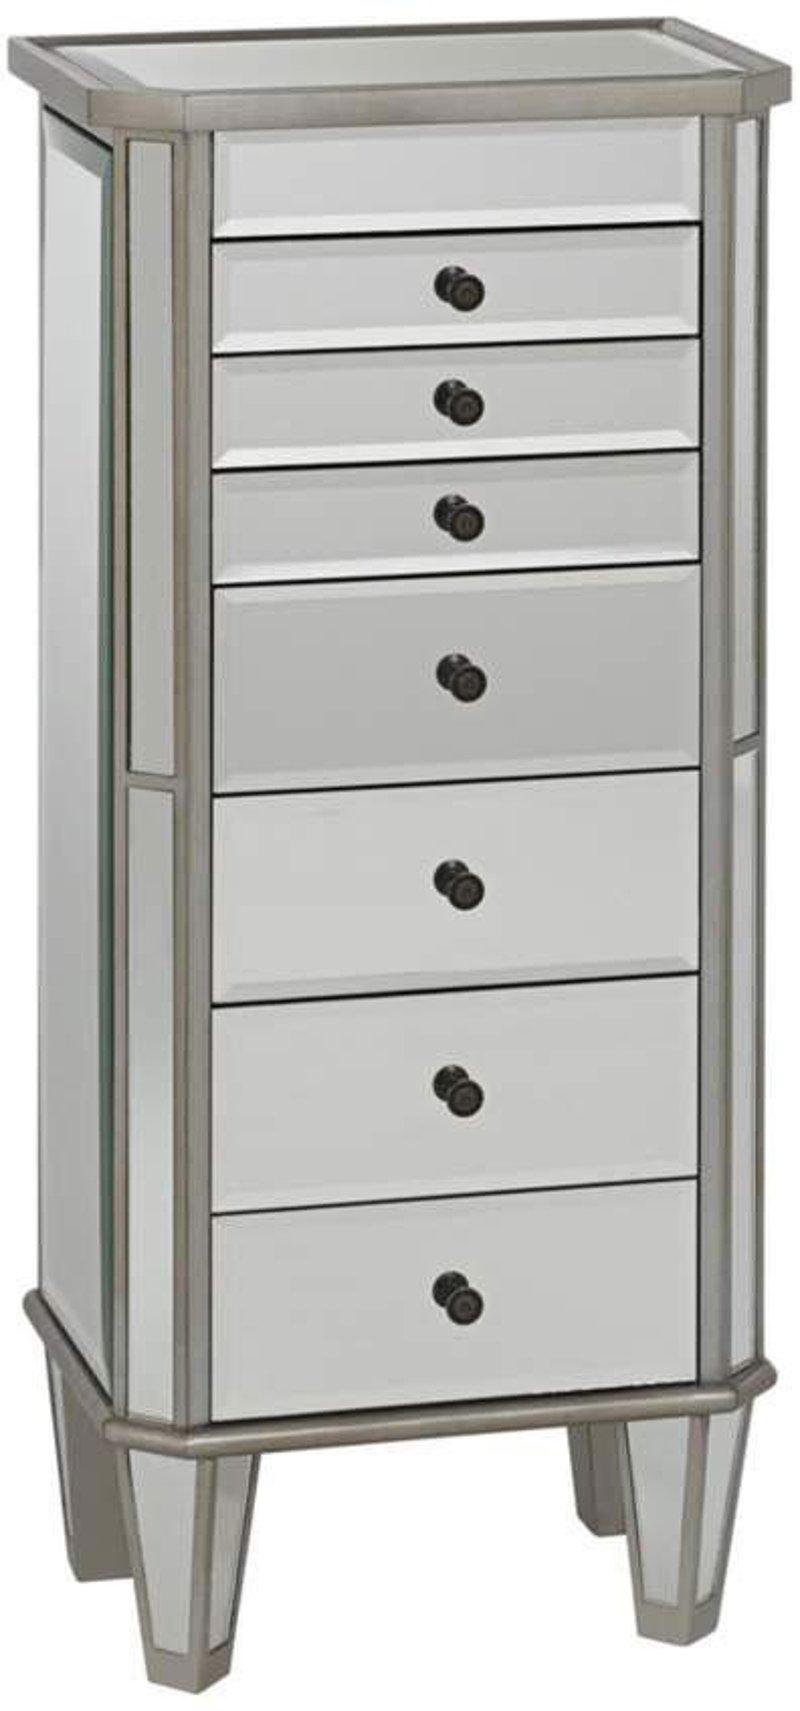 Silver And Mirrored Jewelry Armoire, Mirror Jewelry Cabinet Chest